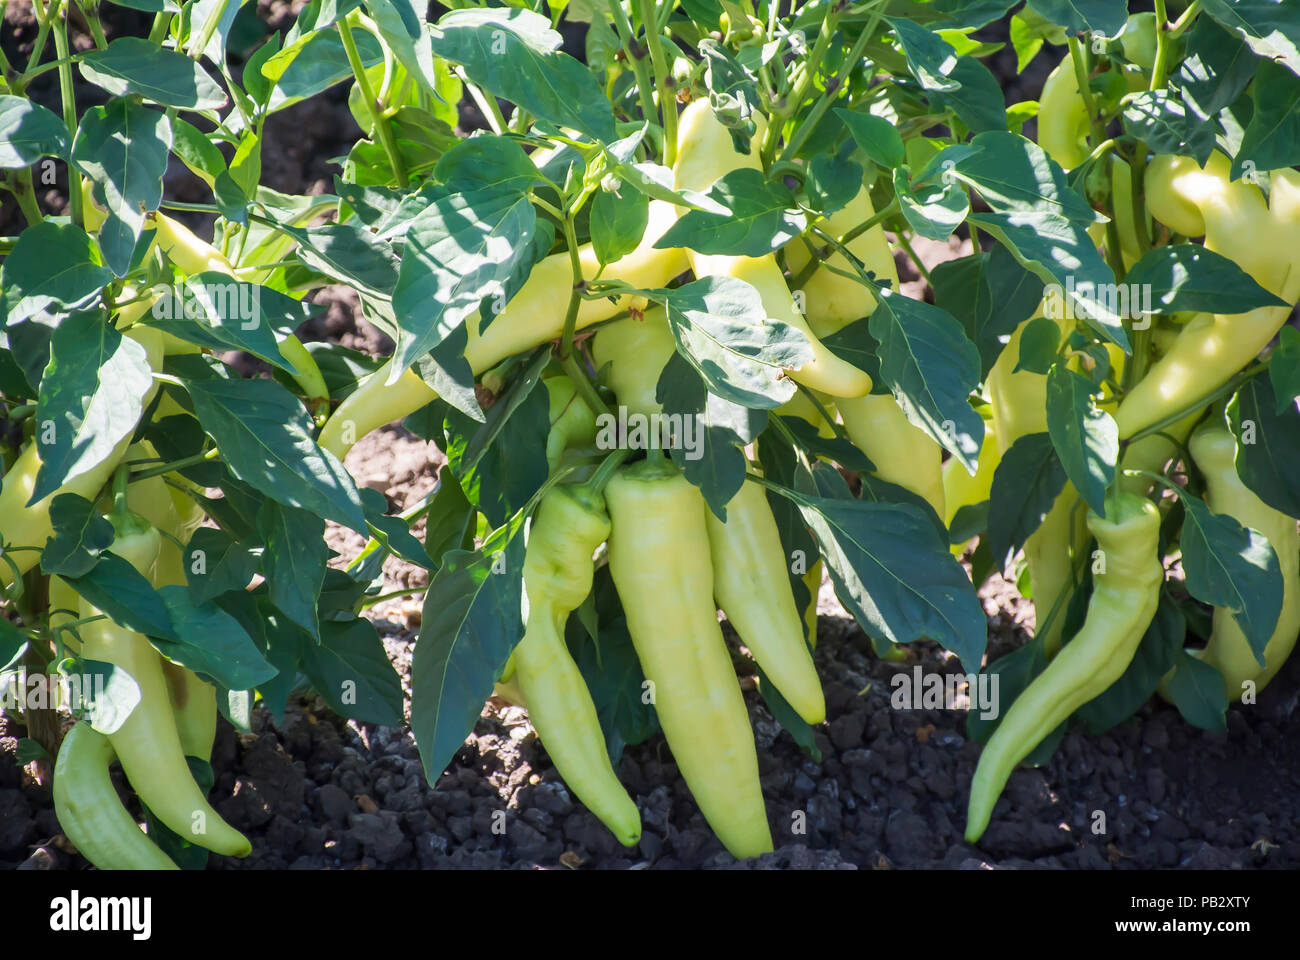 Peppers Growing in Field Stock Photo